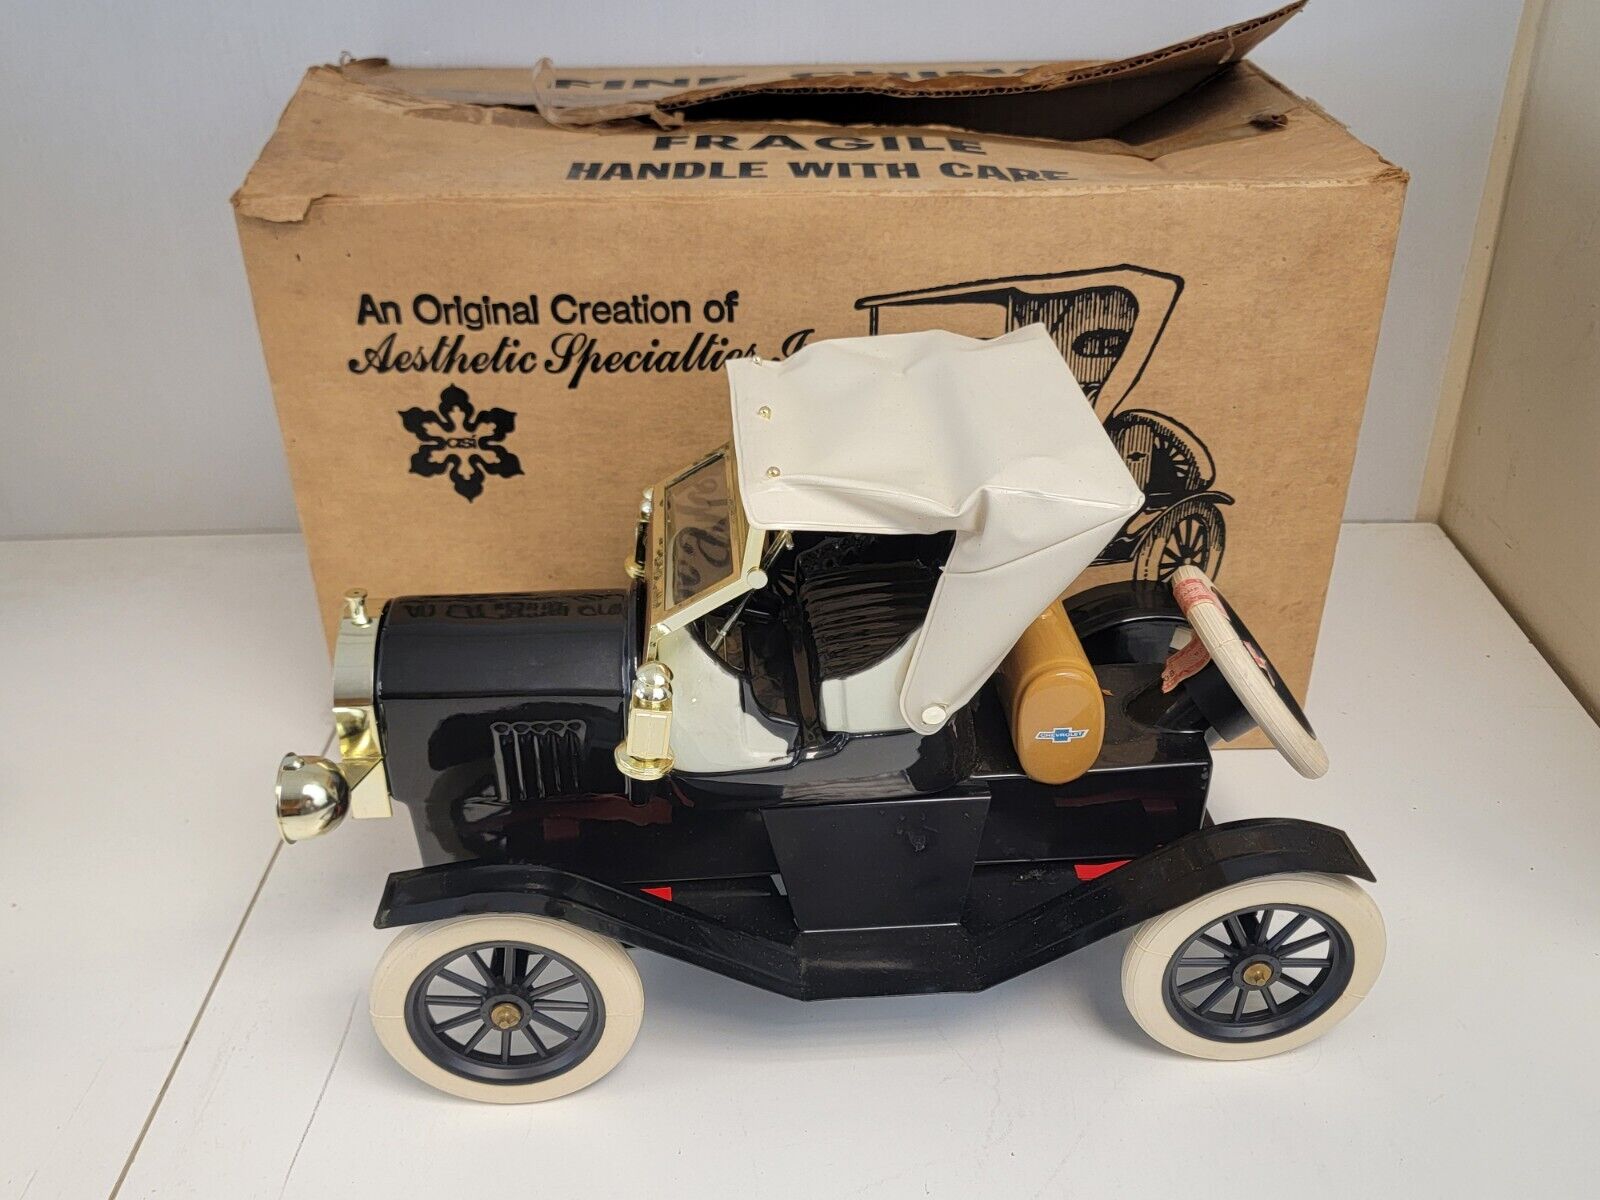 Collectible Vintage McCormick 1914 Chevrolet Limited Edition Decanter Michter's